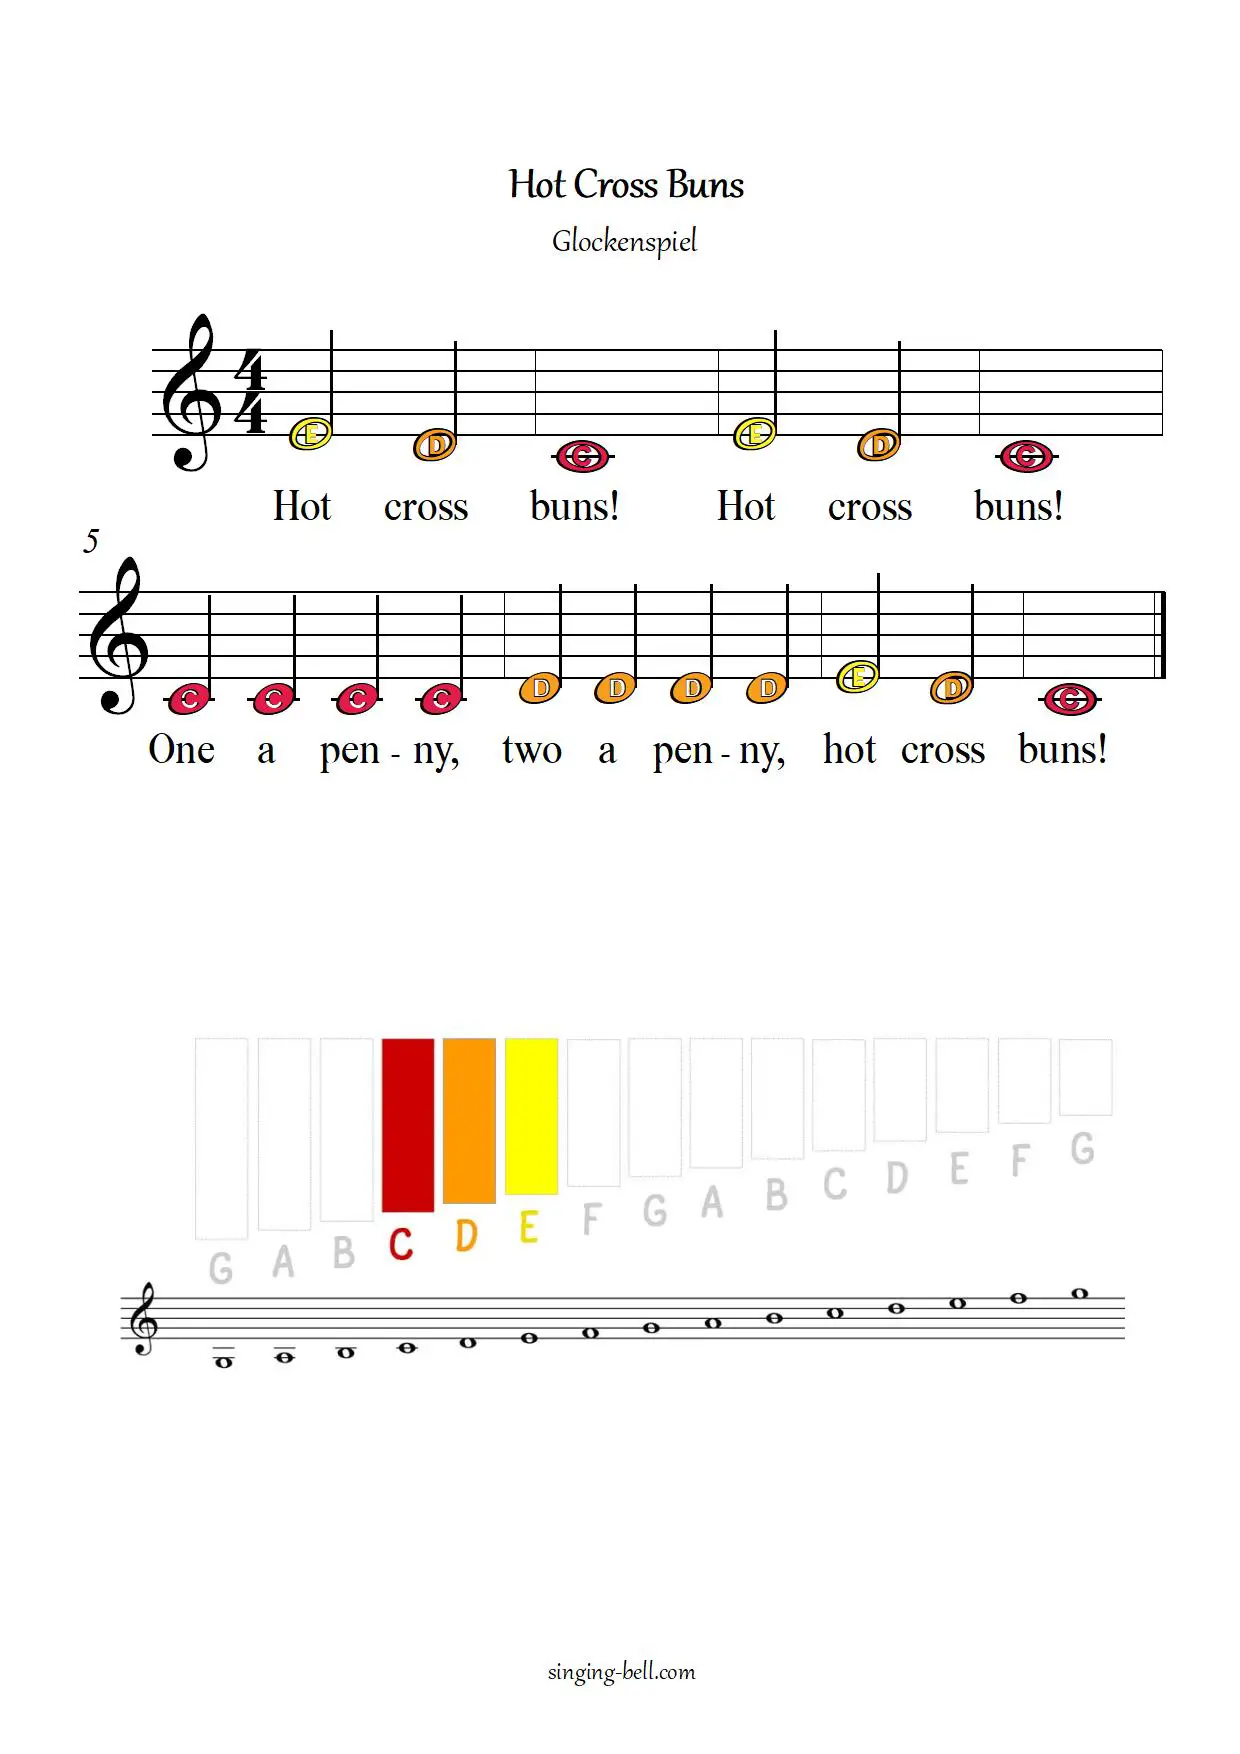 Hot Cross Buns free xylophone glockenspiel sheet music letters color notes chart pdf